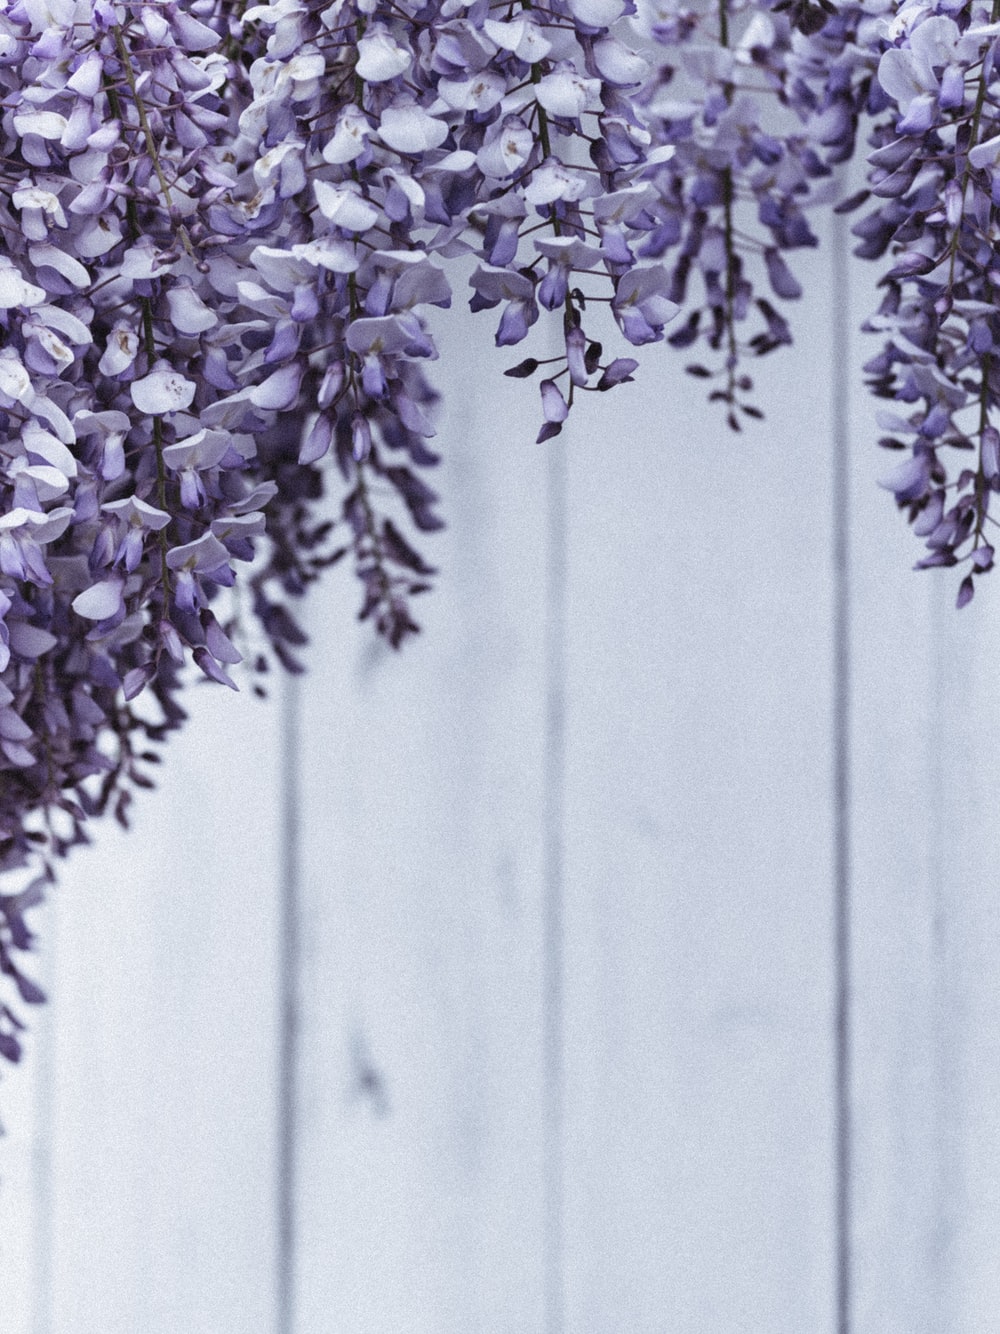 purple and white flowers on gray wooden fence photo